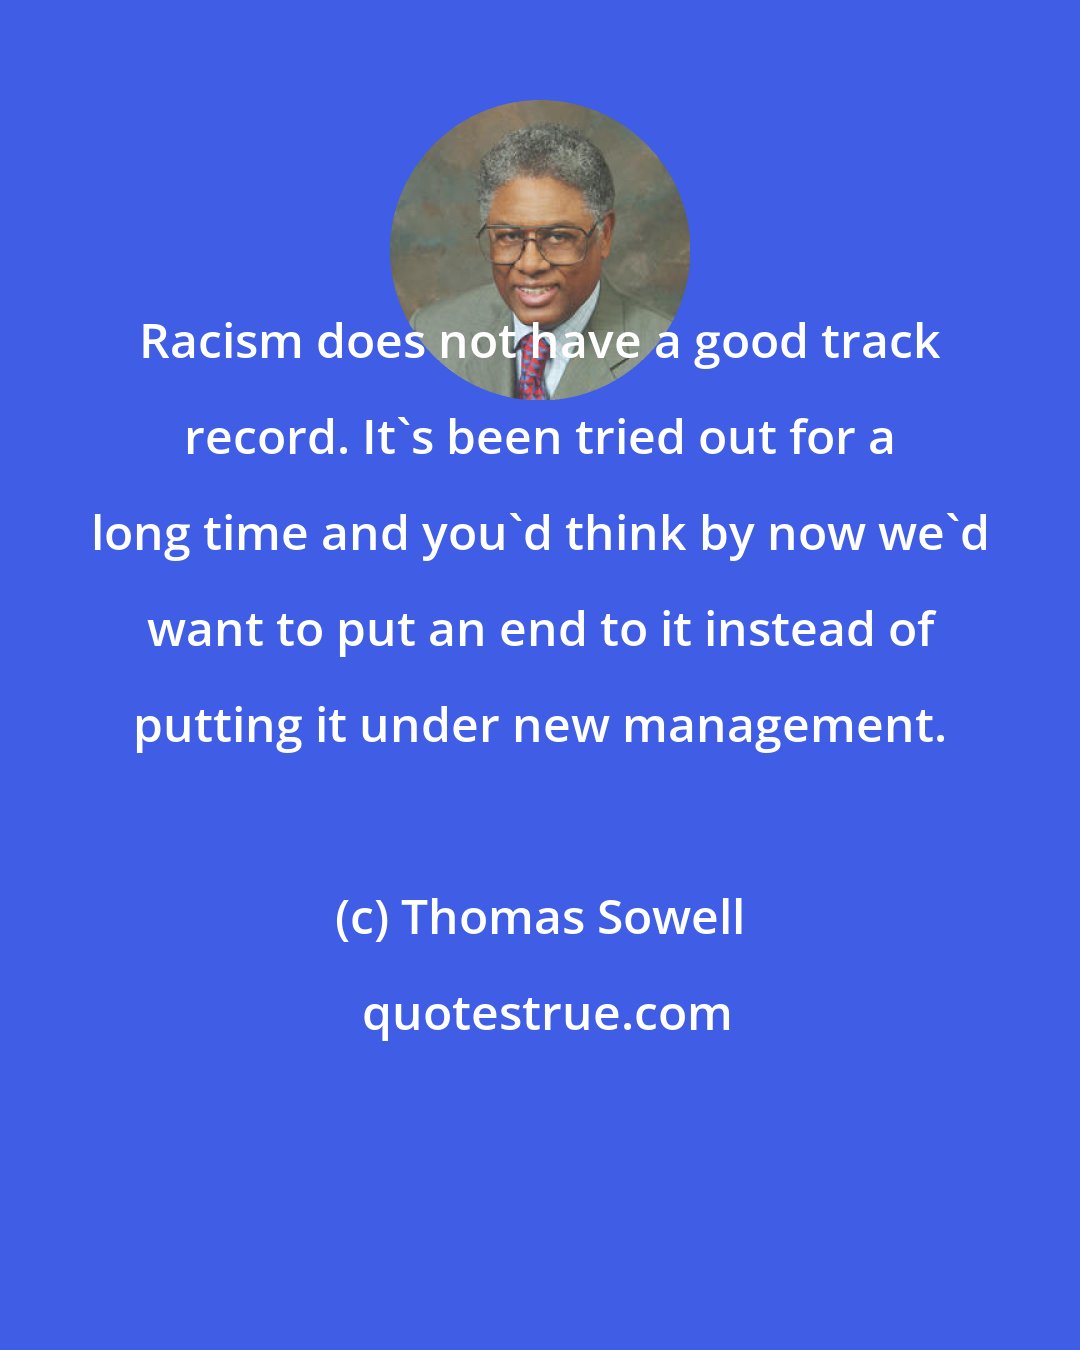 Thomas Sowell: Racism does not have a good track record. It's been tried out for a long time and you'd think by now we'd want to put an end to it instead of putting it under new management.